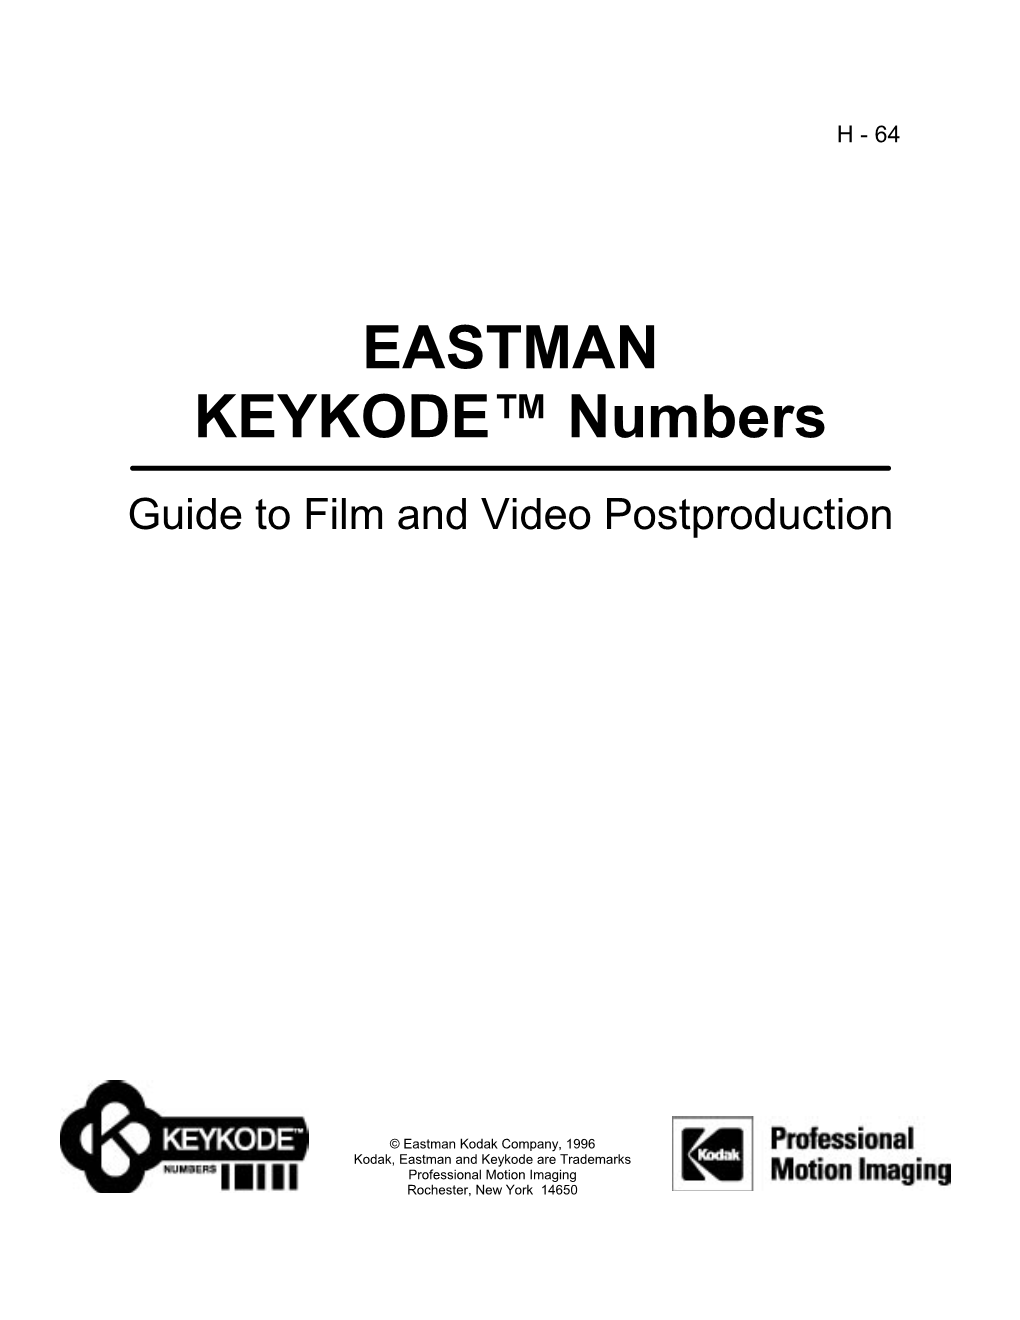 Film and Video Postproduction with EASTMAN KEYKODE™ Numbers